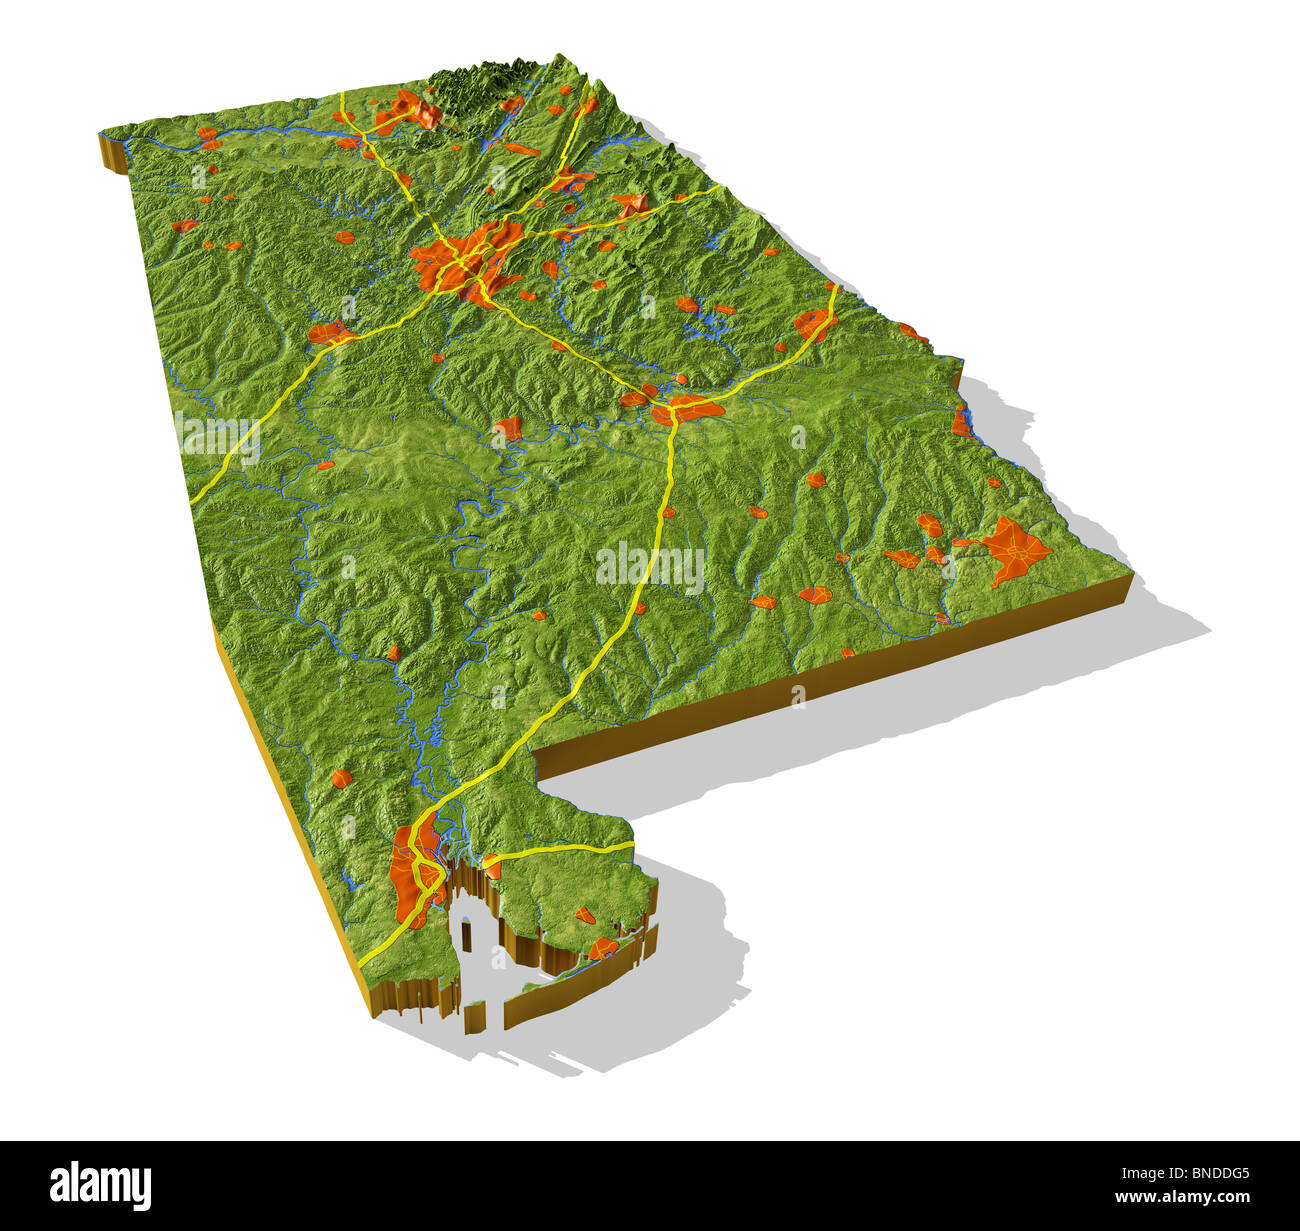 Alabama, 3D relief map cut-out with urban areas and interstate highways. Stock Photo